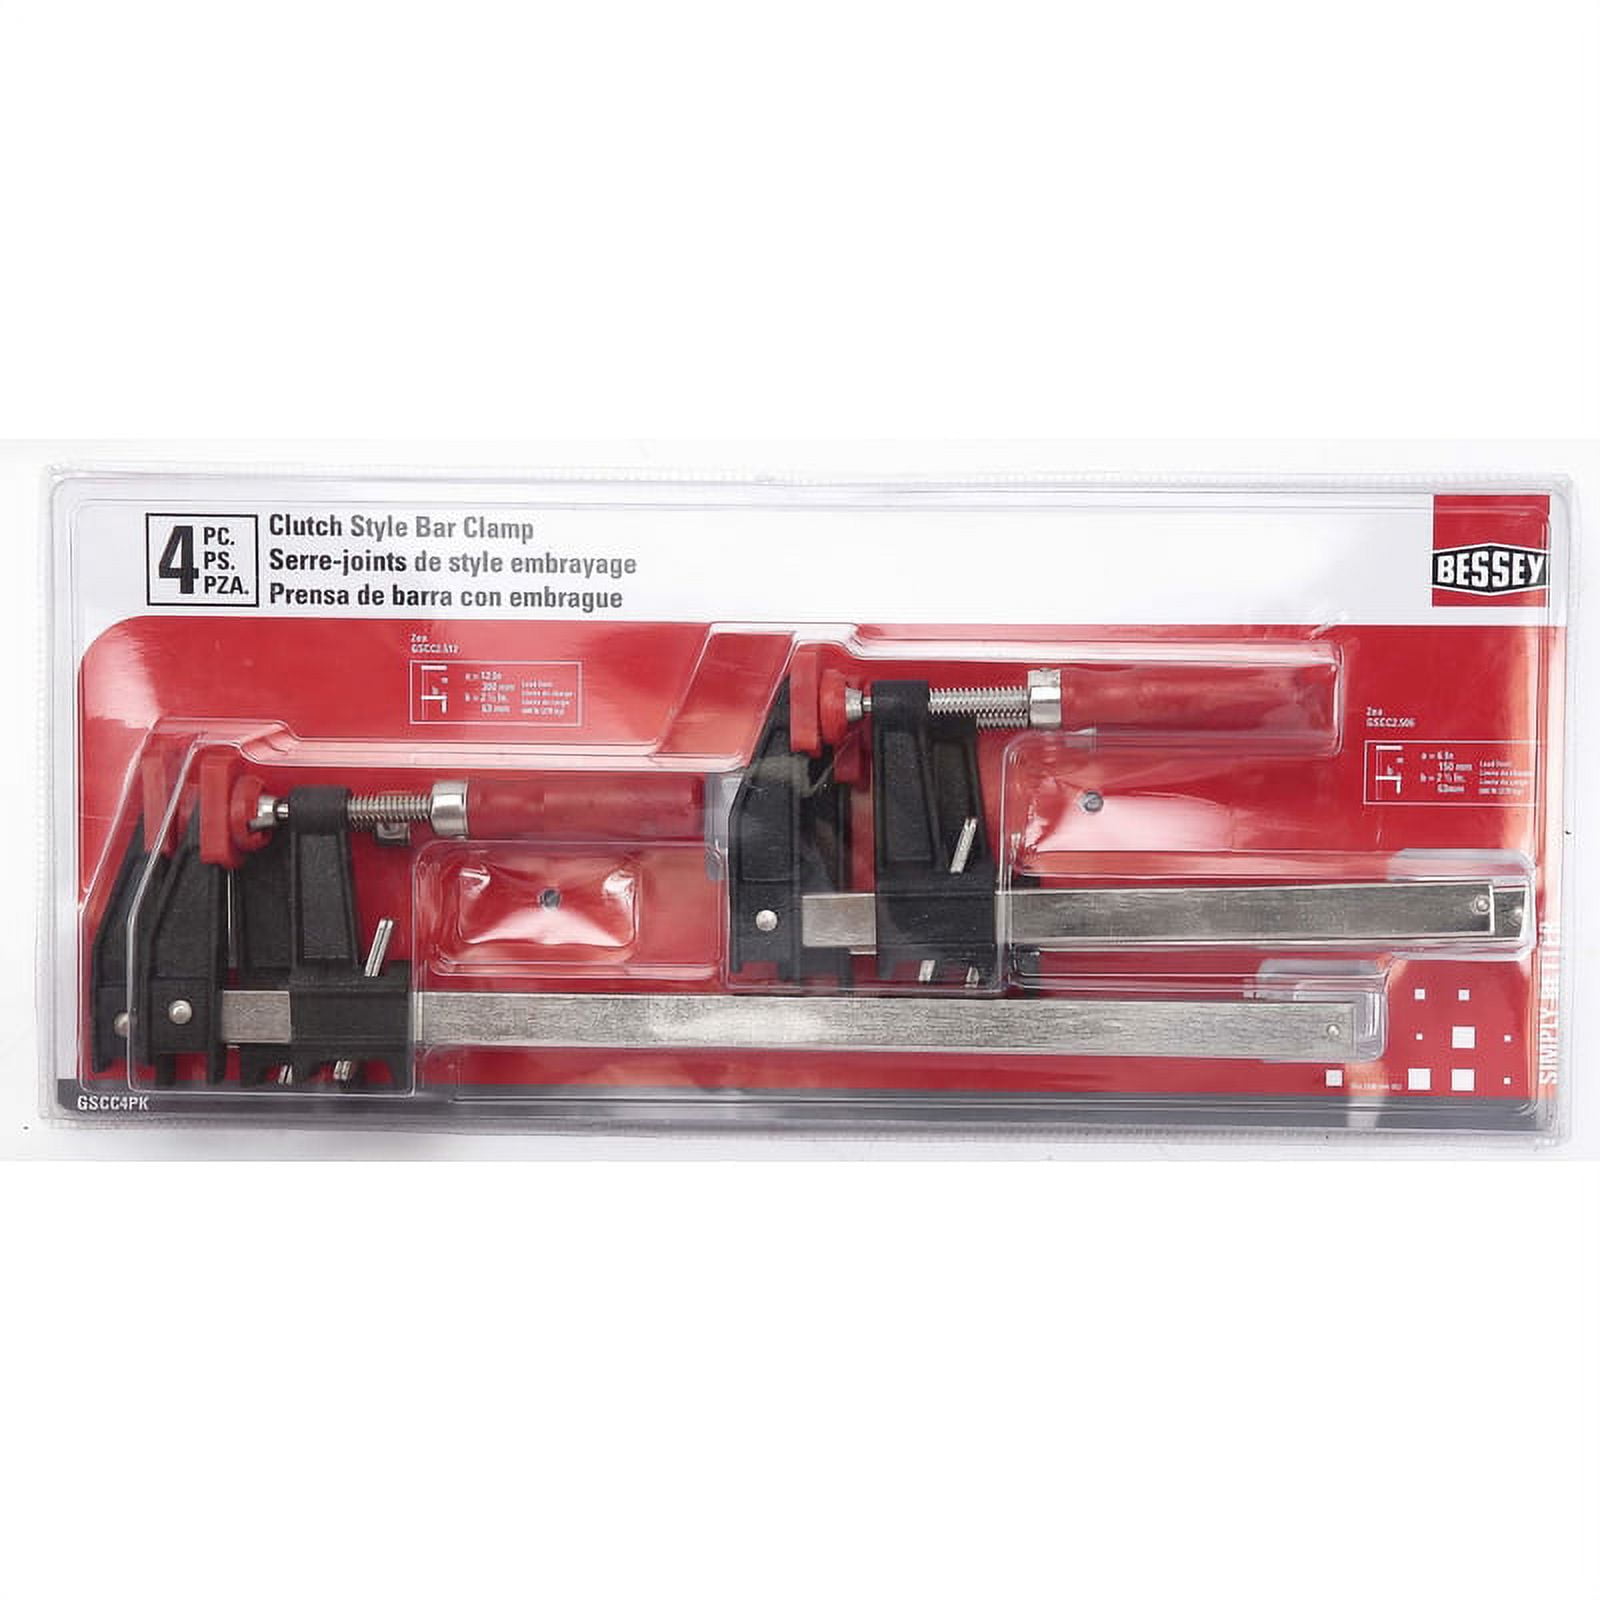 Picture of Bessey 2006105 600 lbs Clutch Style Bar Clamp Set